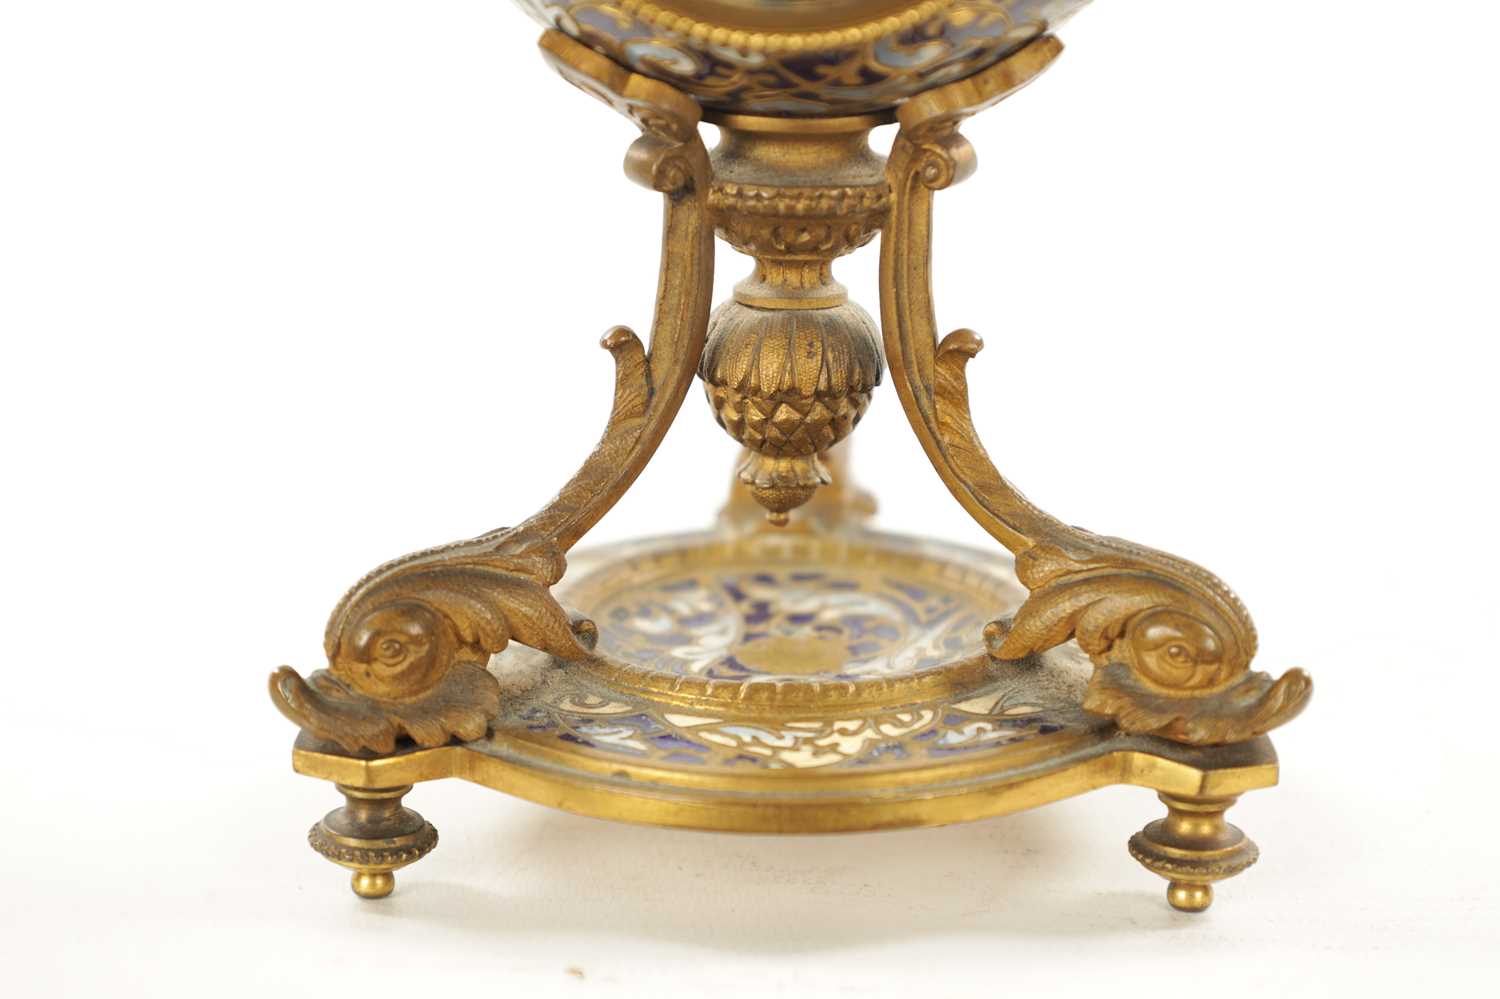 A LATE 19TH CENTURY FRENCH ORMOLU CHAMPLEVE ENAMEL MANTEL CLOCK - Image 4 of 8